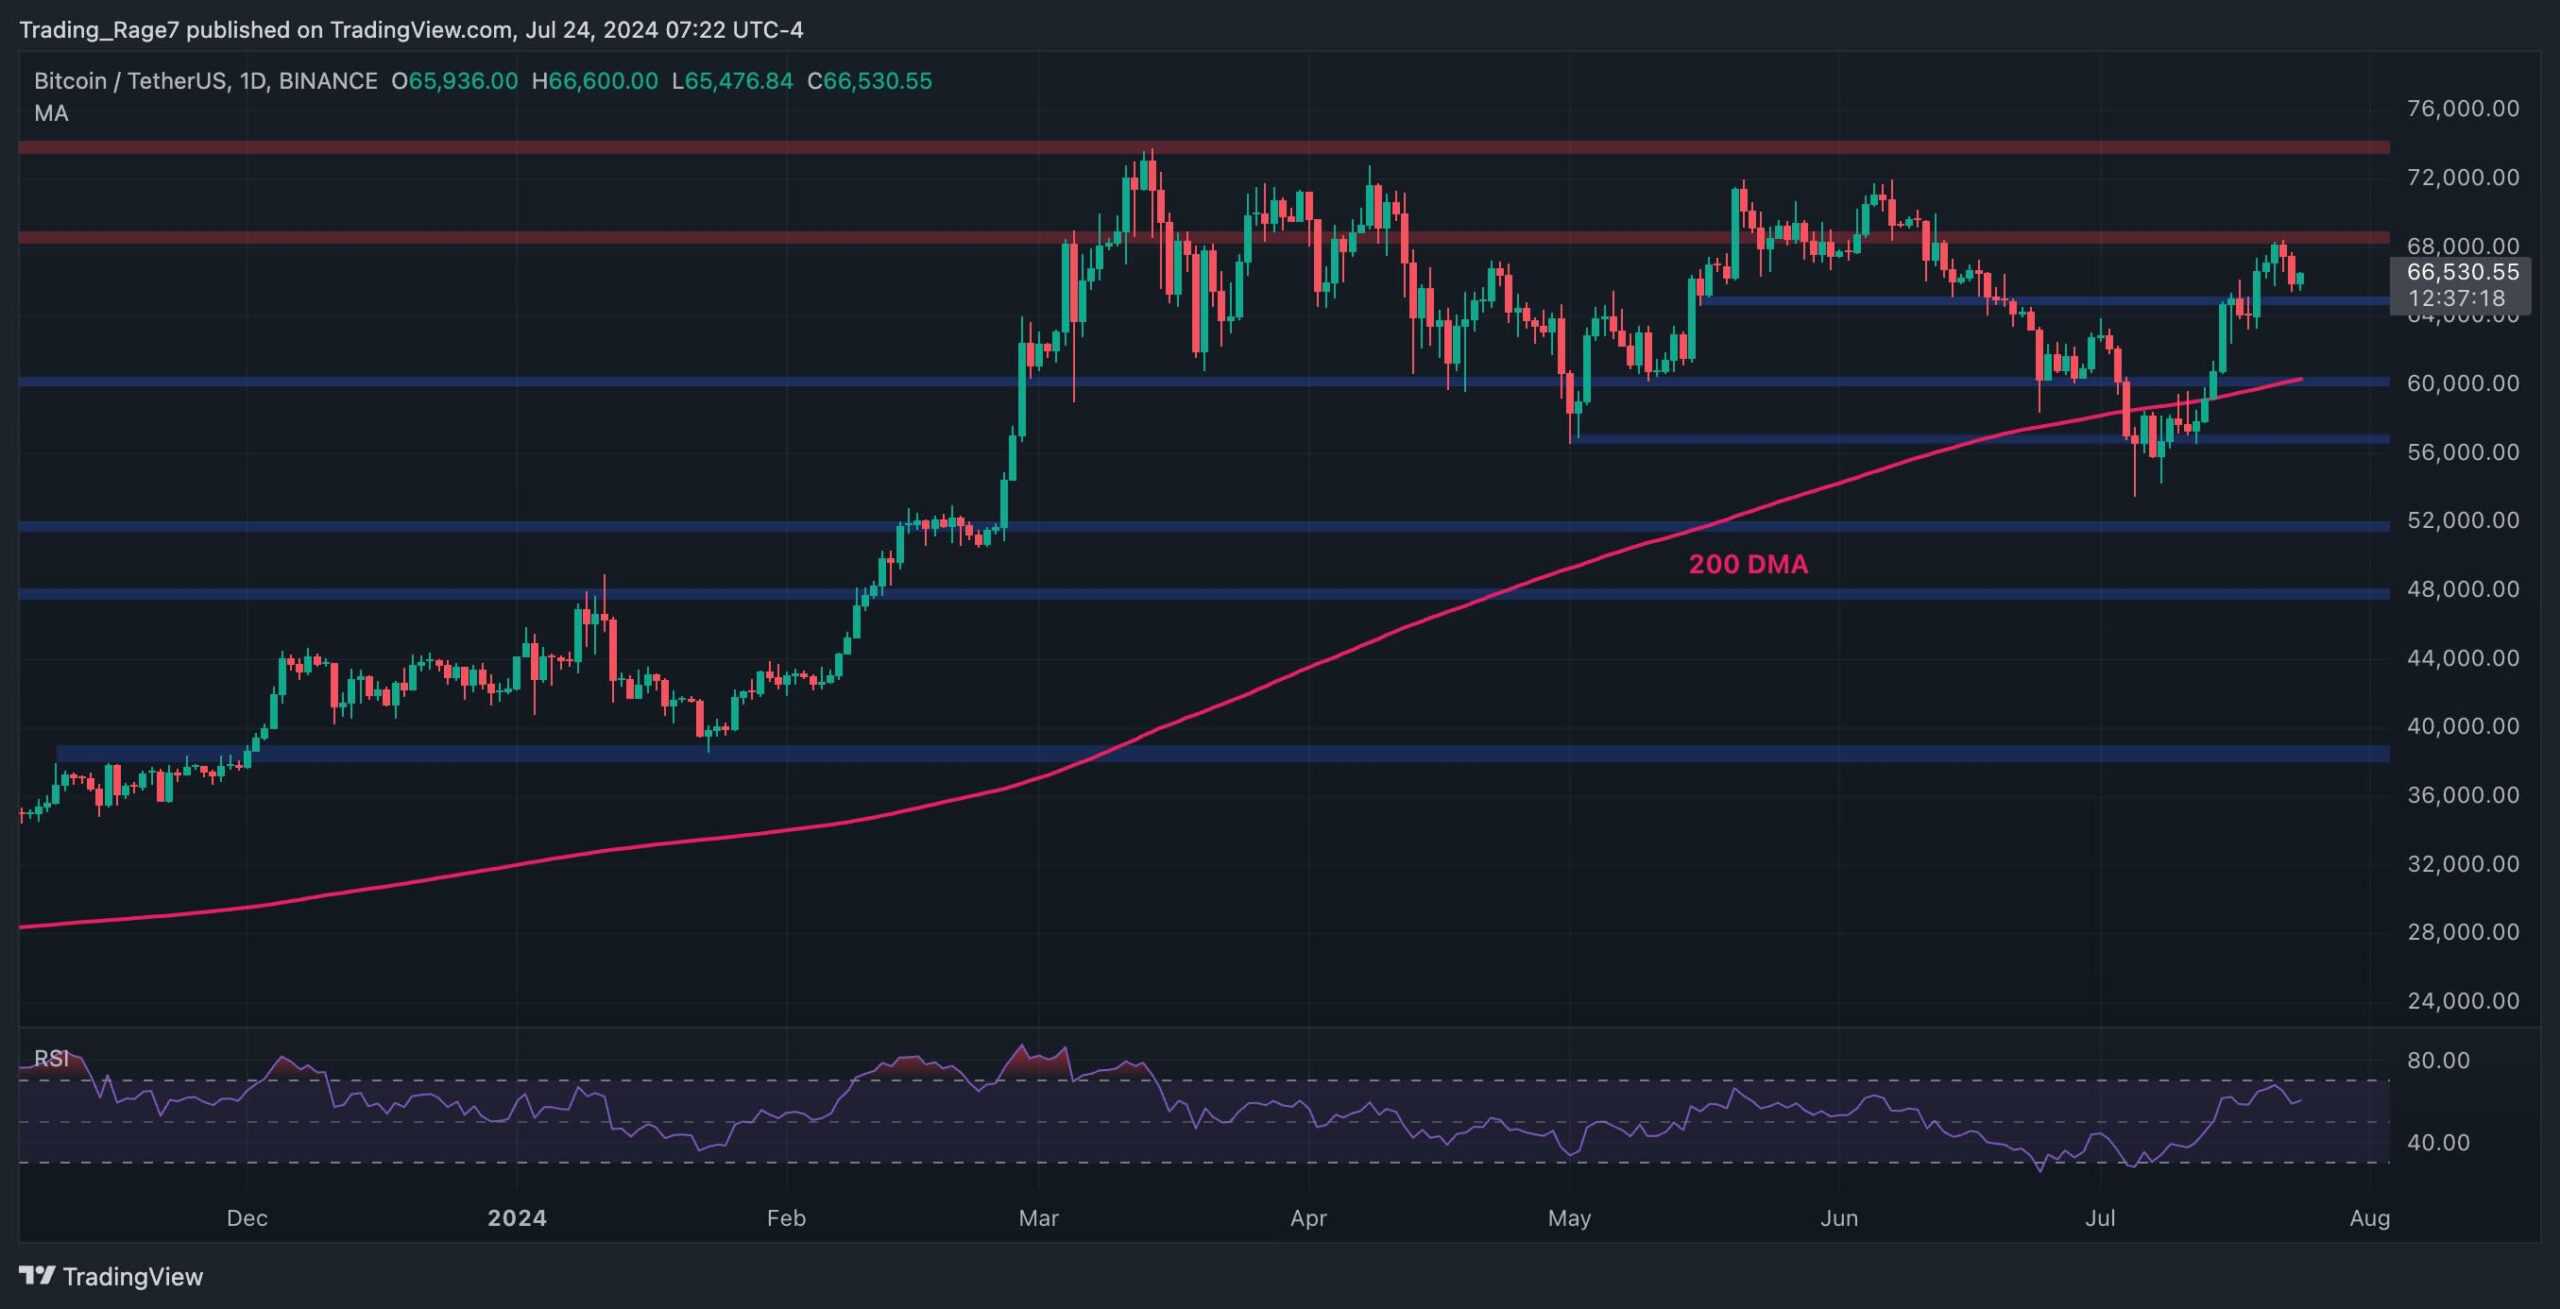 Bitcoin Price Analysis: The Bulls Must Protect This Level to Keep Hopes for $70K Alive